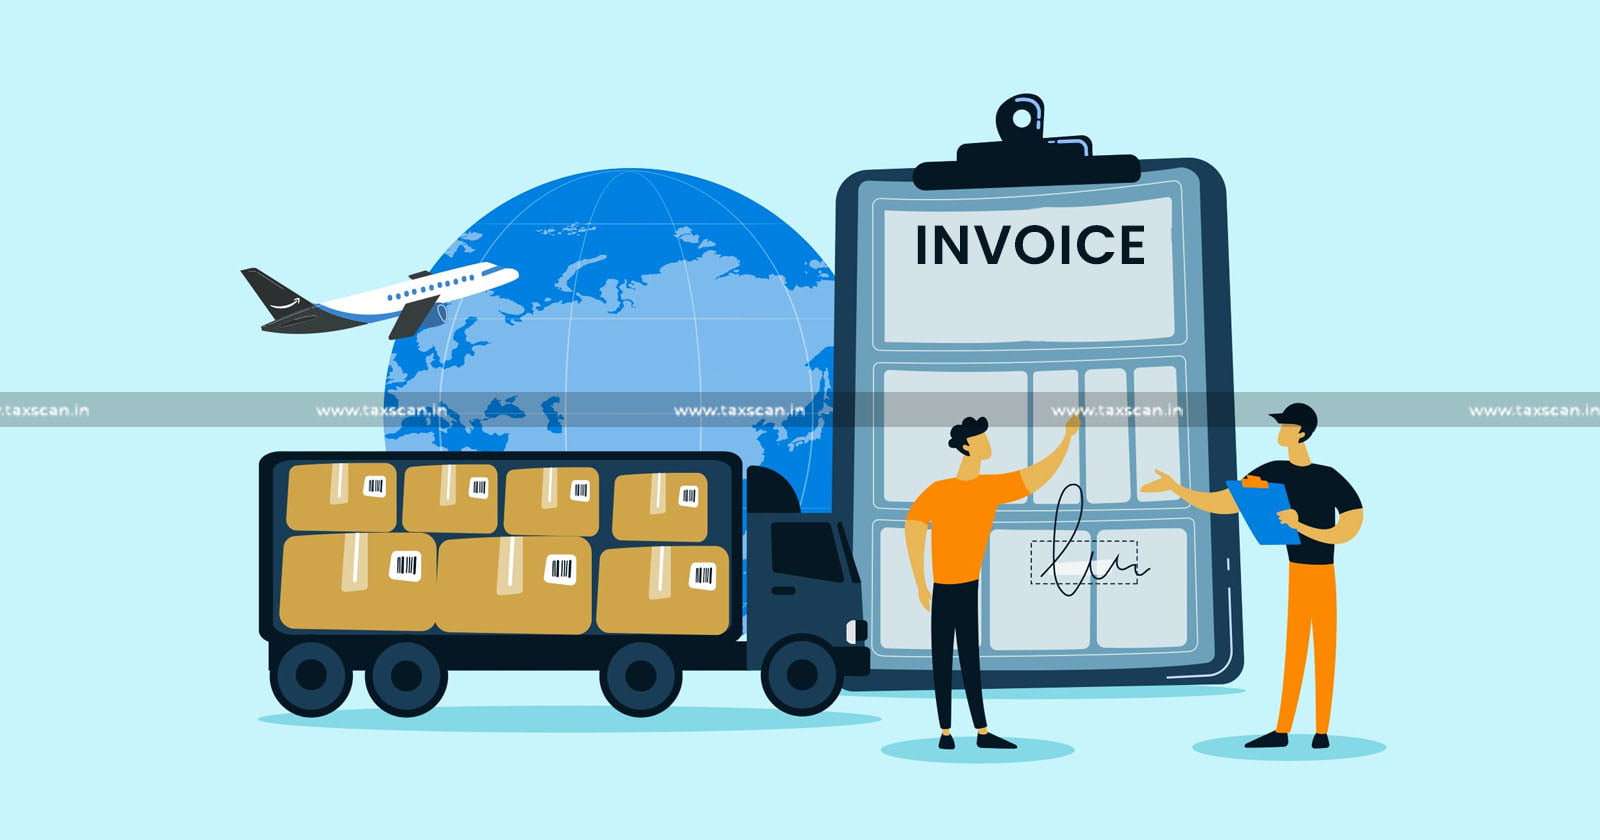 Typographical Error in Export Invoice - Typographical Error - Export Invoice - Invoice - Export - Bombay High Court - Sales tax department - Sales tax - ITC - Bombay HC directs Sales Tax Dept - Taxscan